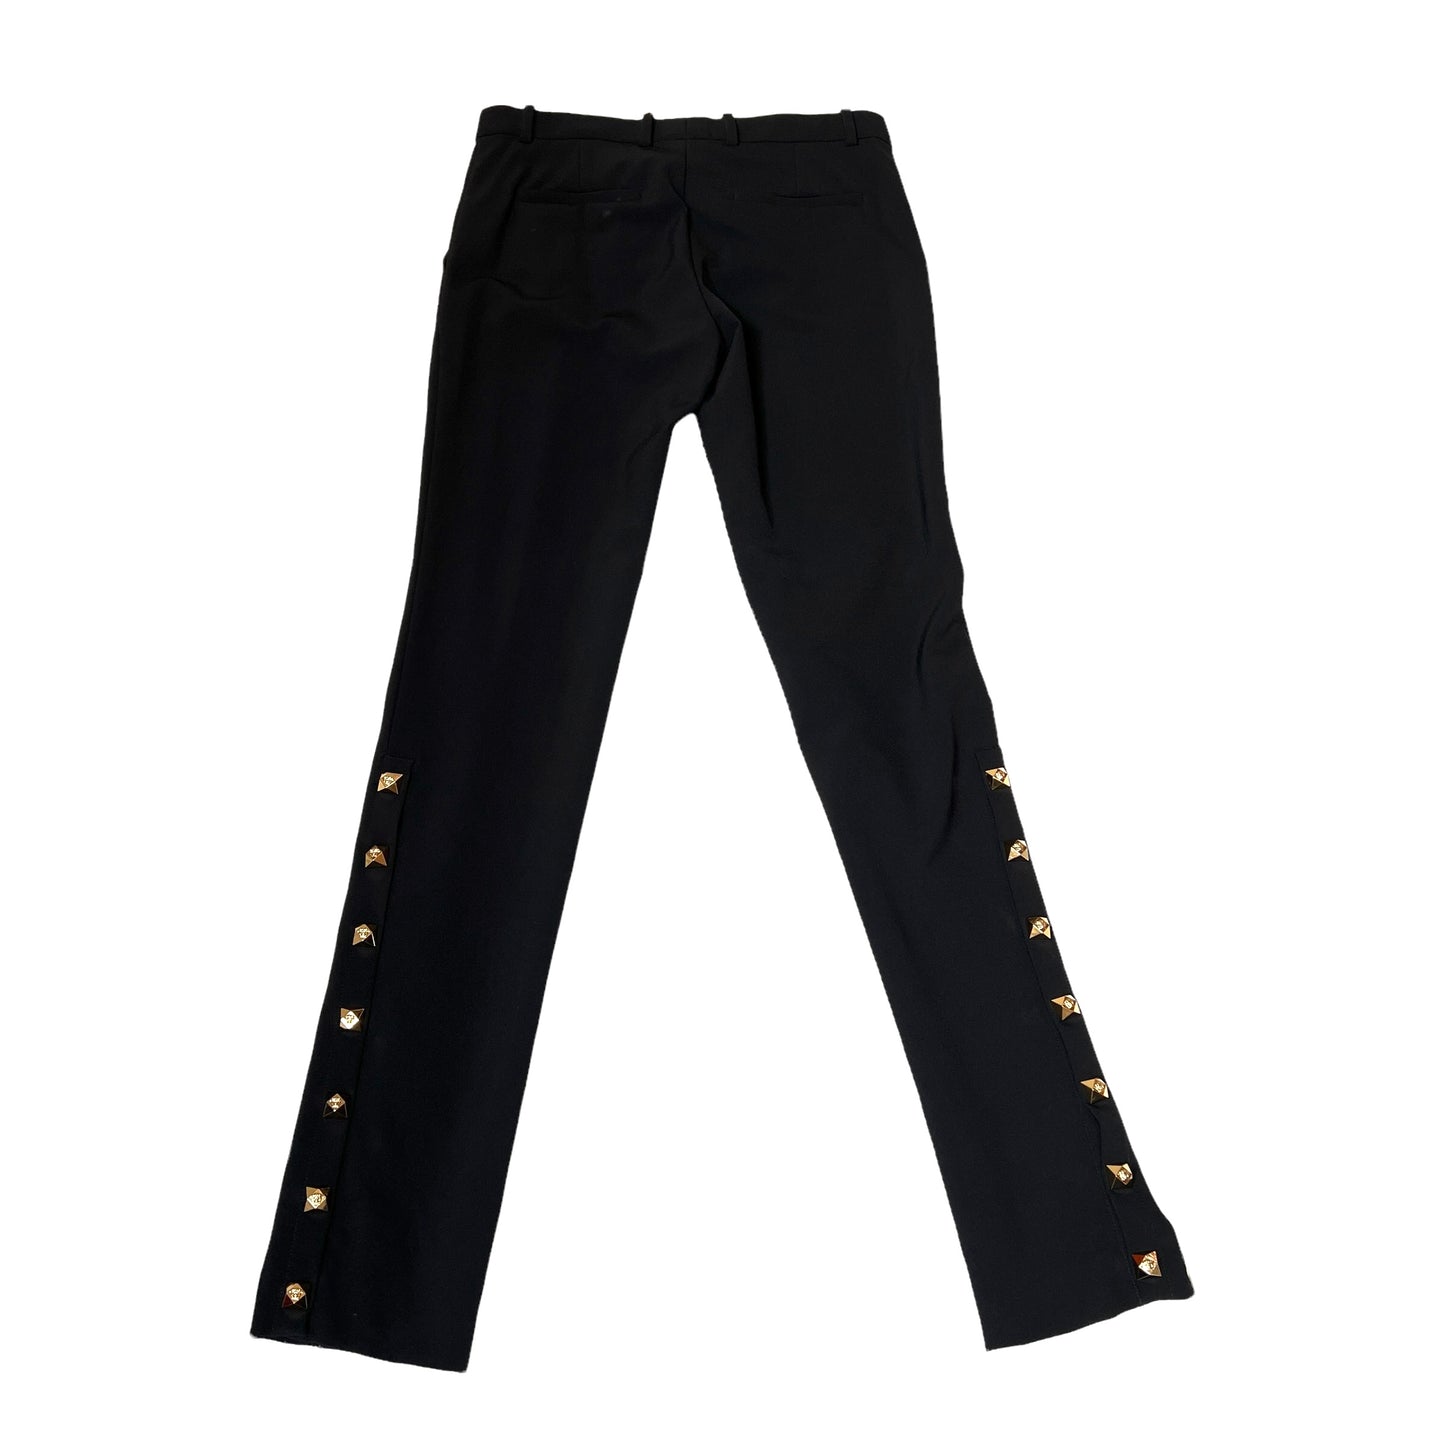 Black Pants with Gold Studs - 42